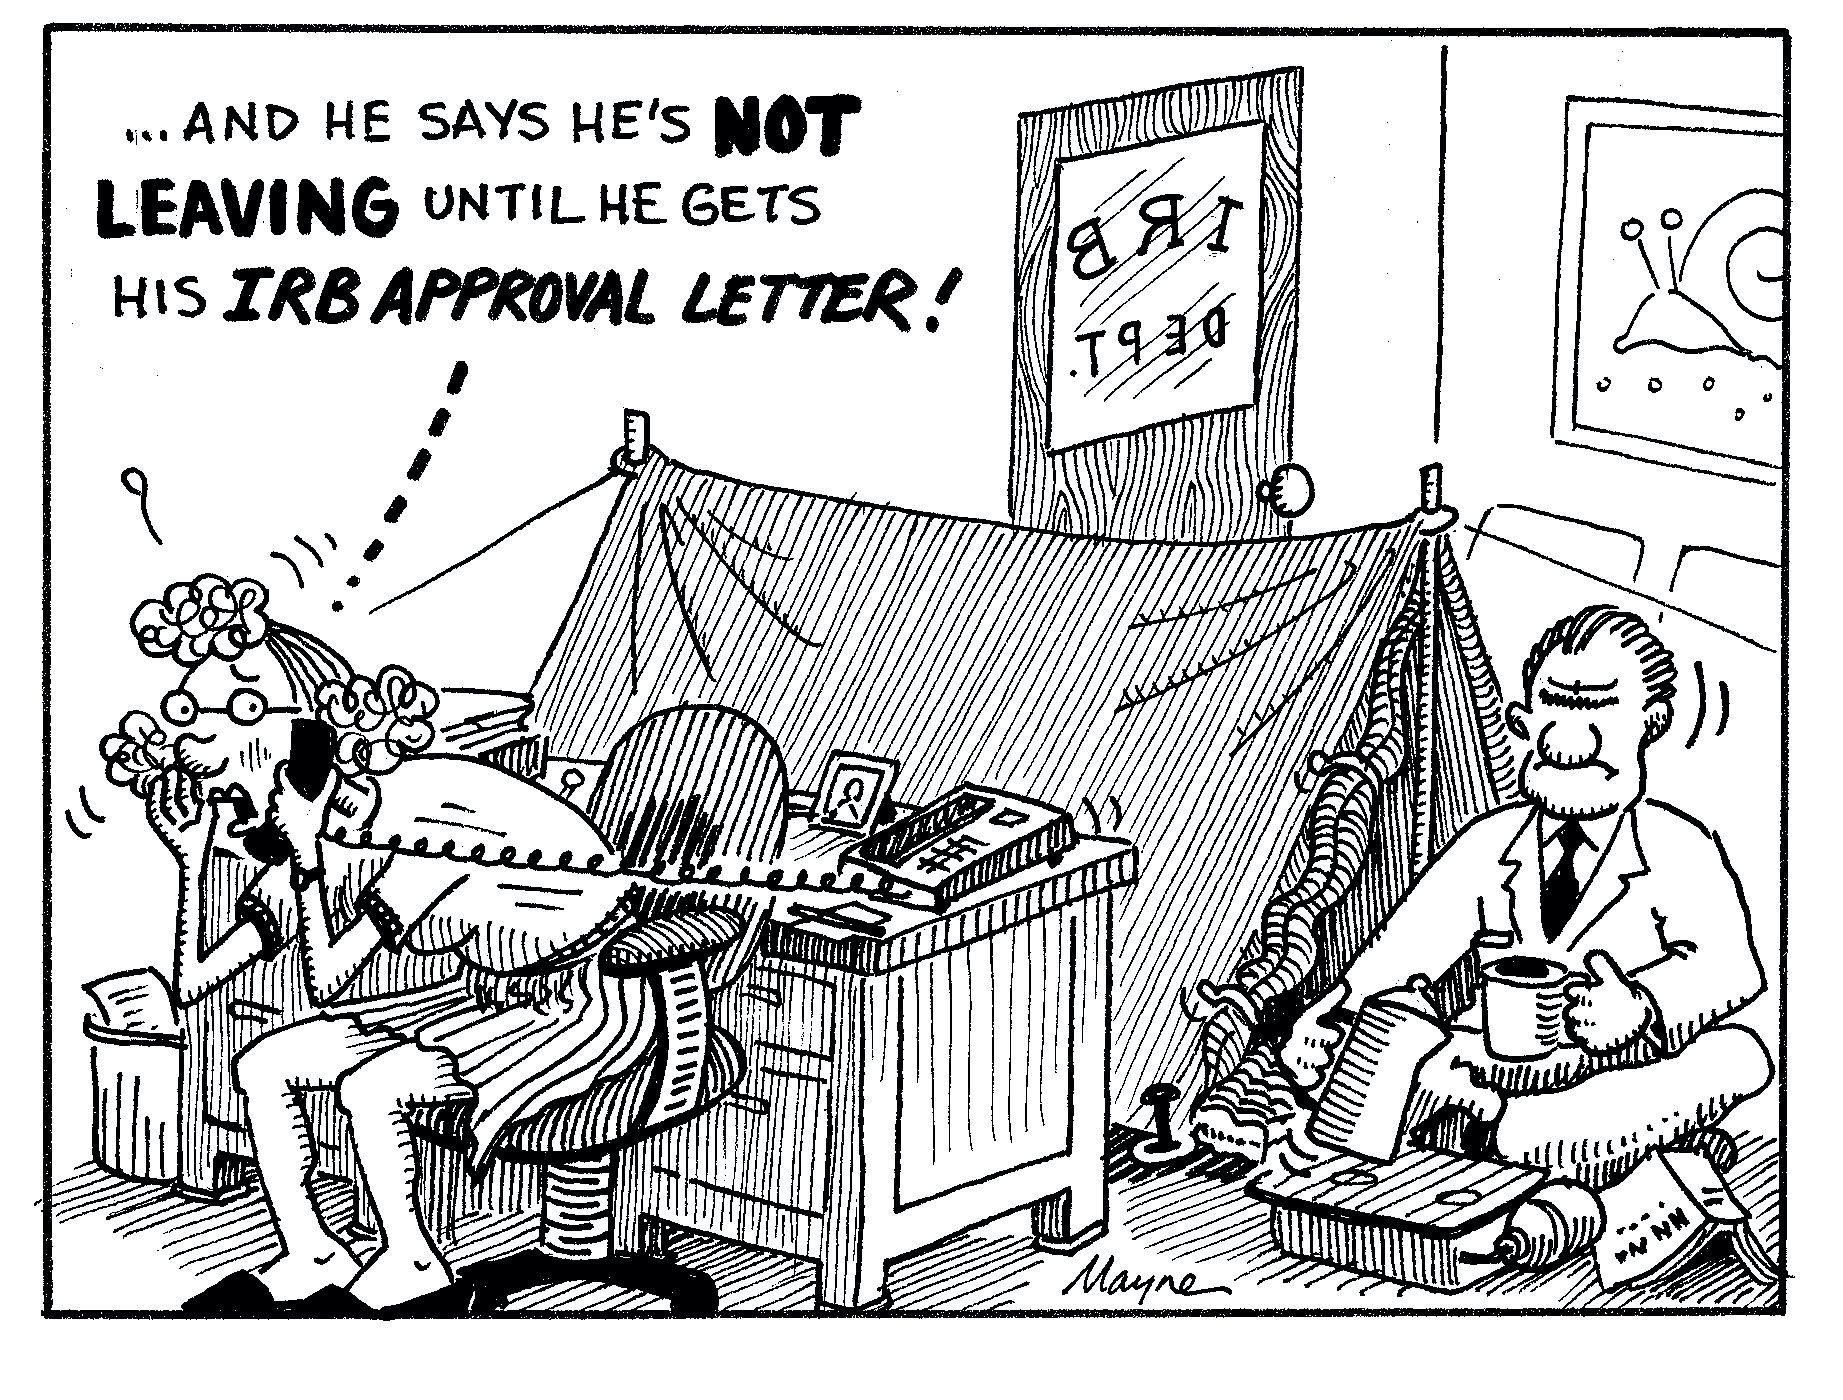 Funny cartoon of a researcher camping in a secretary's office while he waits for an ethics approval letter.